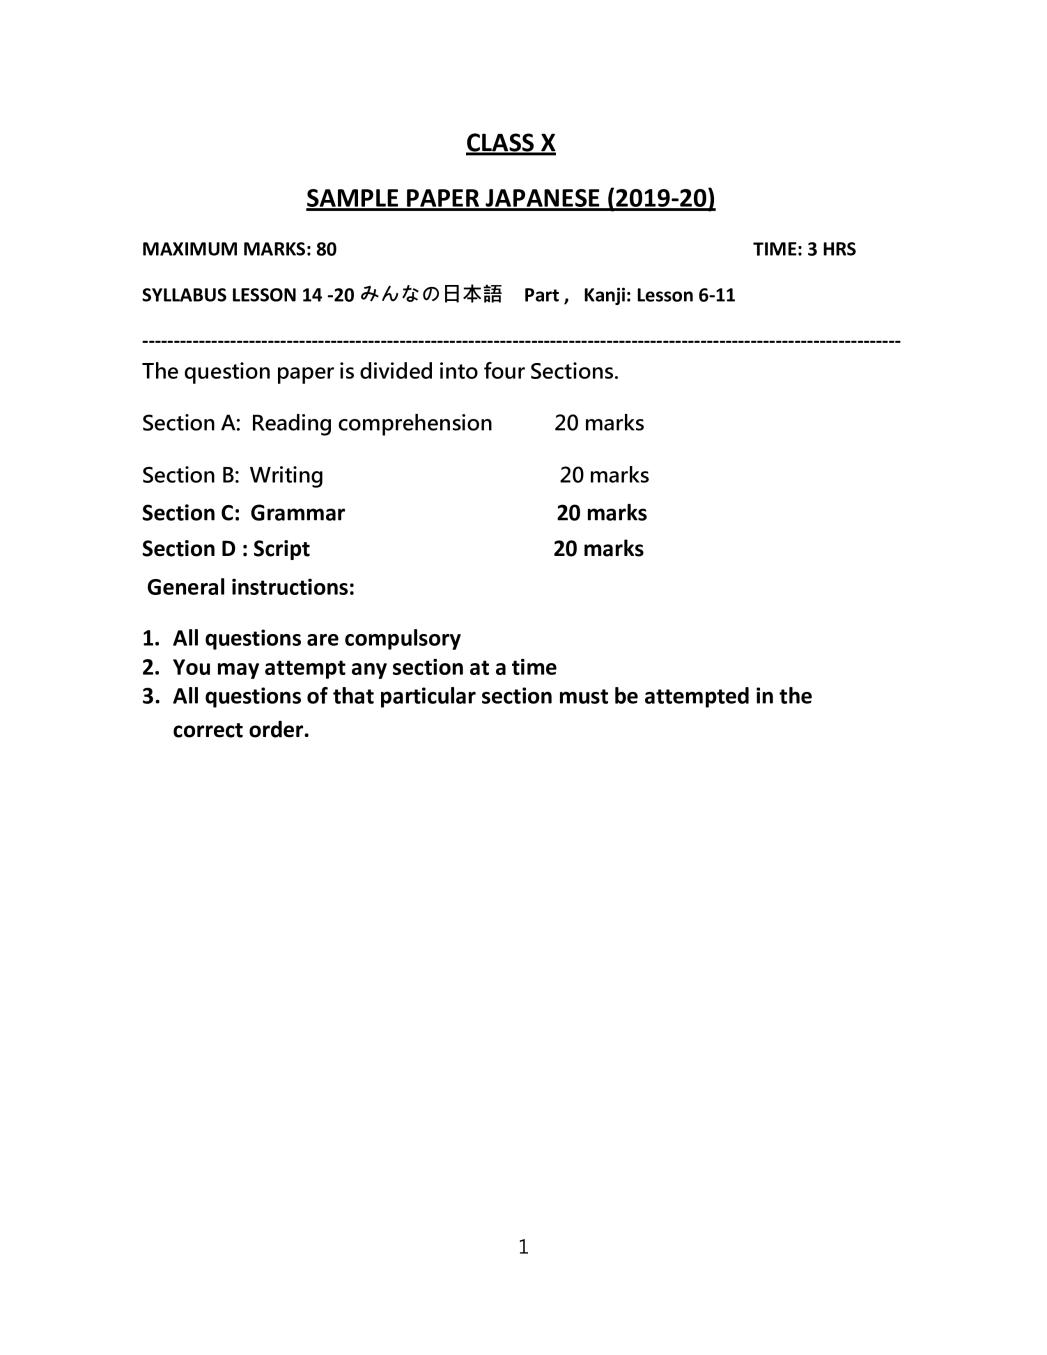 CBSE Class 10 Sample Paper 2020 for Japanese - Page 1